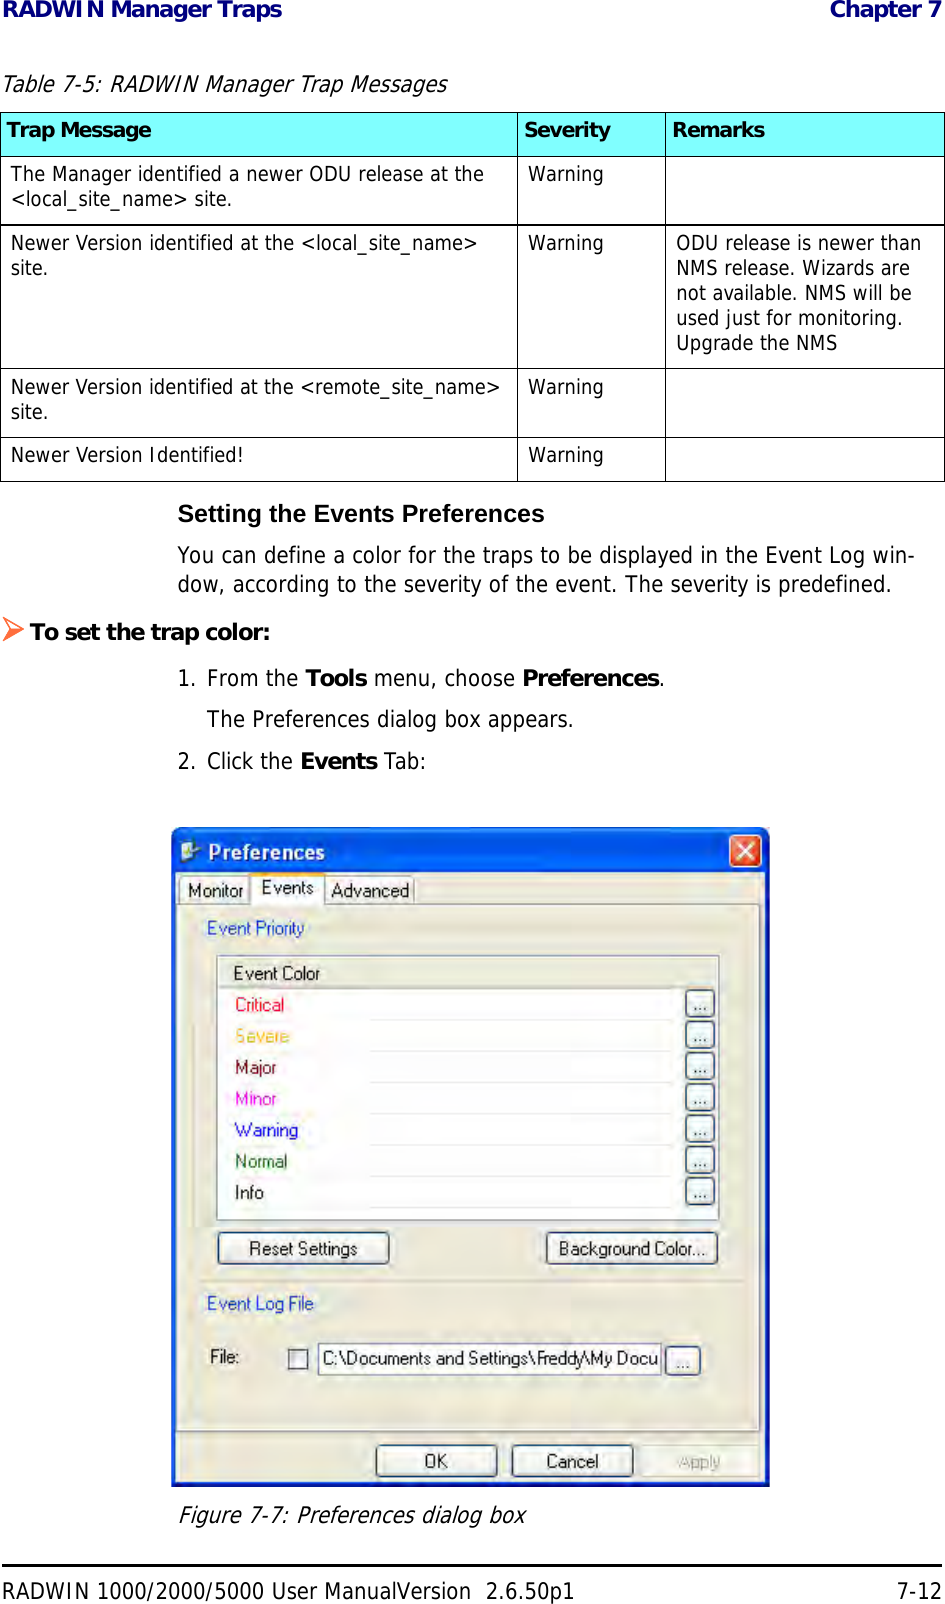 RADWIN Manager Traps  Chapter 7RADWIN 1000/2000/5000 User ManualVersion  2.6.50p1 7-12Setting the Events PreferencesYou can define a color for the traps to be displayed in the Event Log win-dow, according to the severity of the event. The severity is predefined.To set the trap color:1. From the Tools menu, choose Preferences.The Preferences dialog box appears.2. Click the Events Tab:Figure 7-7: Preferences dialog boxThe Manager identified a newer ODU release at the &lt;local_site_name&gt; site. WarningNewer Version identified at the &lt;local_site_name&gt; site. Warning ODU release is newer than NMS release. Wizards are not available. NMS will be used just for monitoring. Upgrade the NMSNewer Version identified at the &lt;remote_site_name&gt; site. WarningNewer Version Identified! WarningTable 7-5: RADWIN Manager Trap MessagesTrap Message Severity Remarks